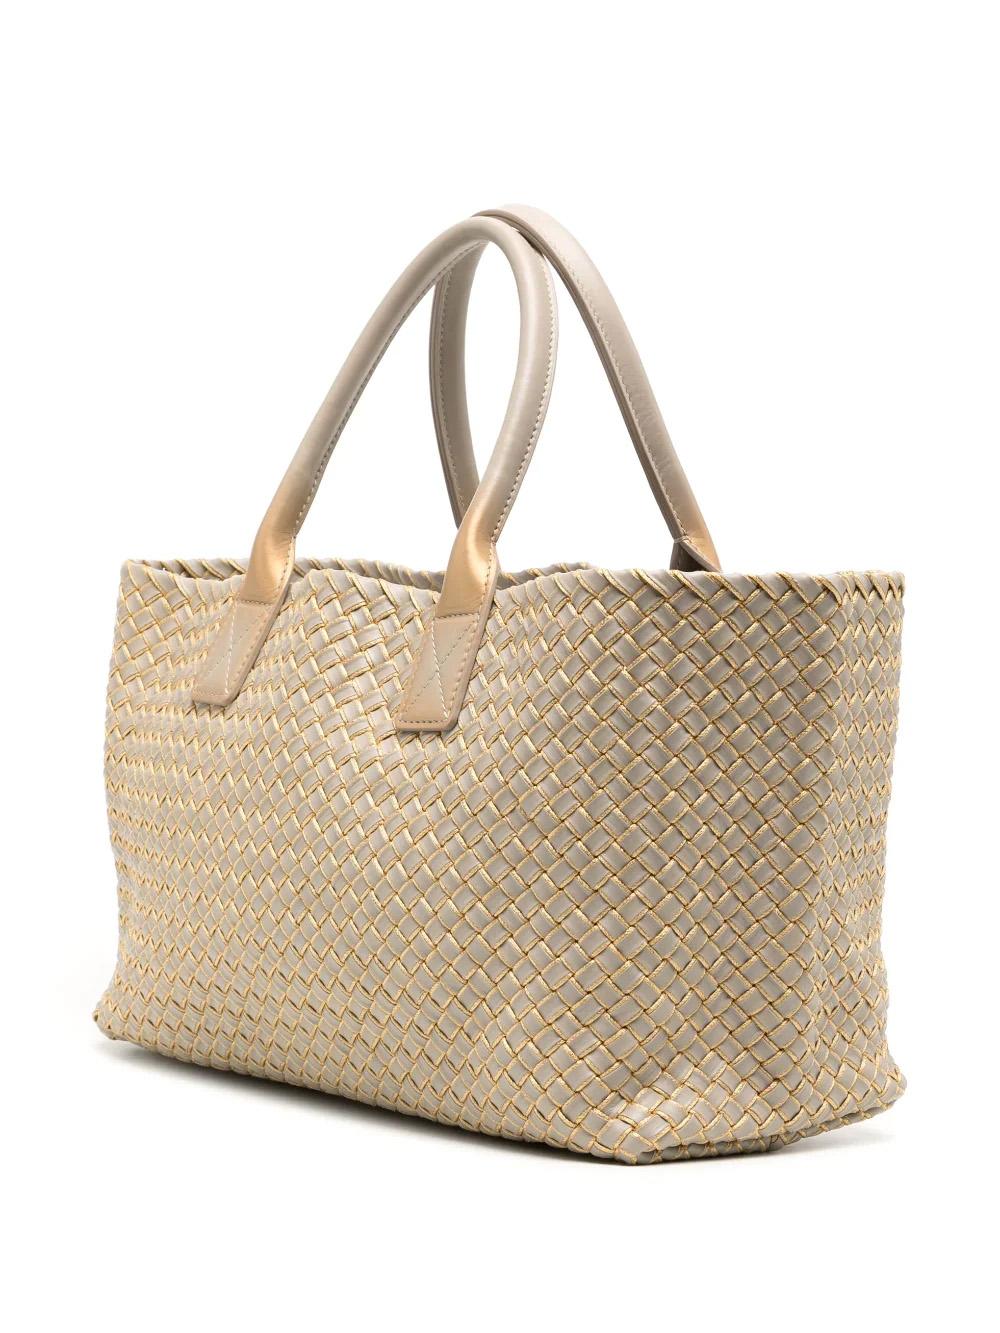 This luxurious tote bag is crafted from Intrecciato leather with Bottega's signature weaving design. It features a single detachable interior pocket with card slots, two rolled-top handles, and an open top. An ideal balance of light grey and